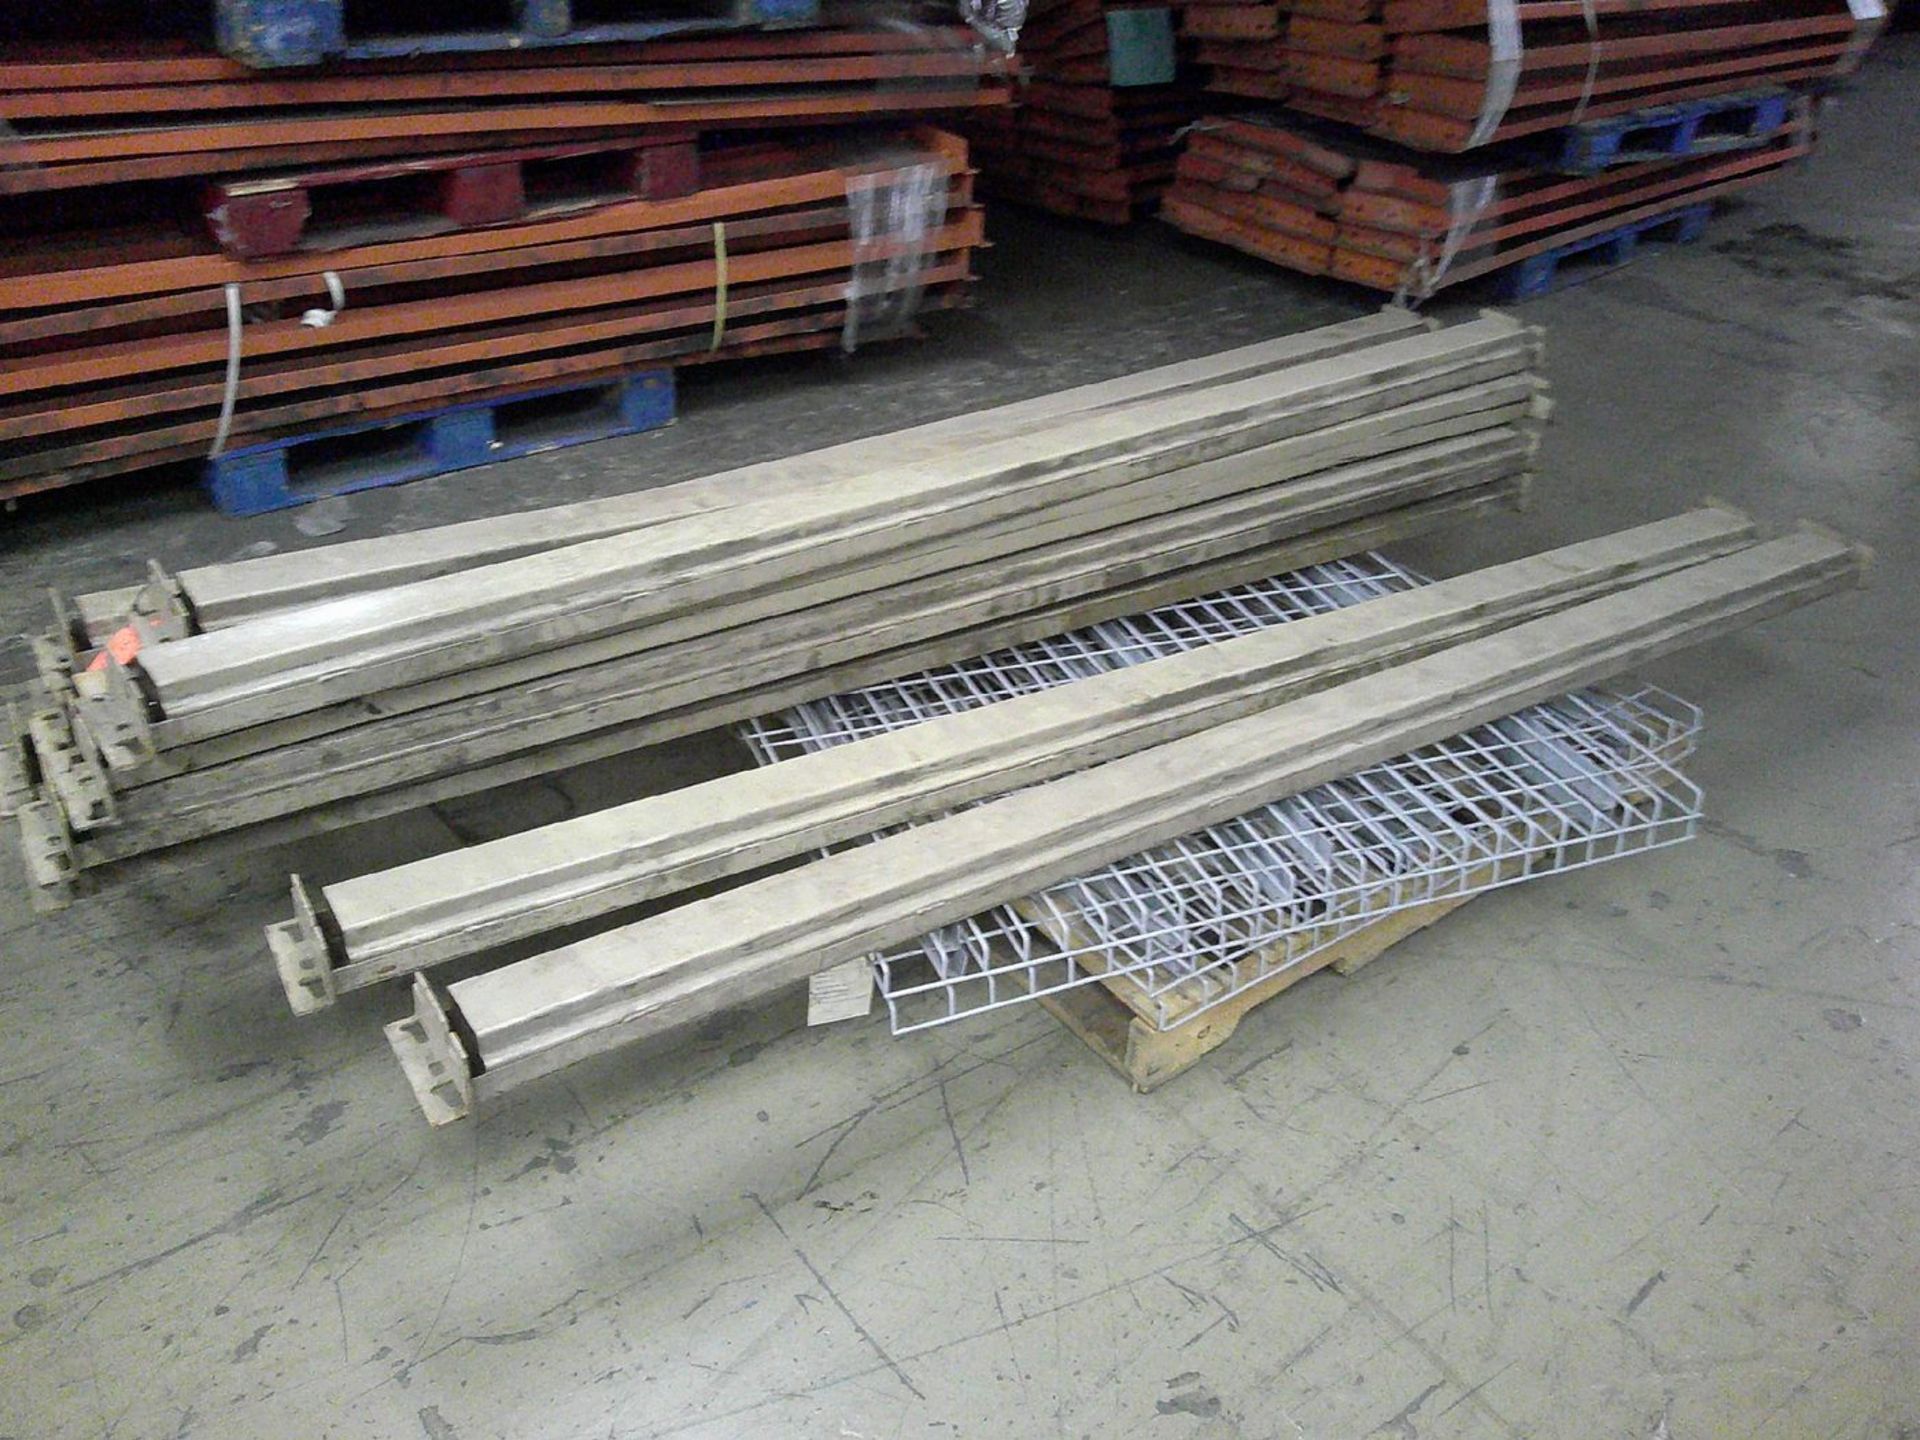 Lot - Pallet of Cross Beams, with Wire Mesh Deck on Pallet; Assorted Uprights; More Cross Beams (3-